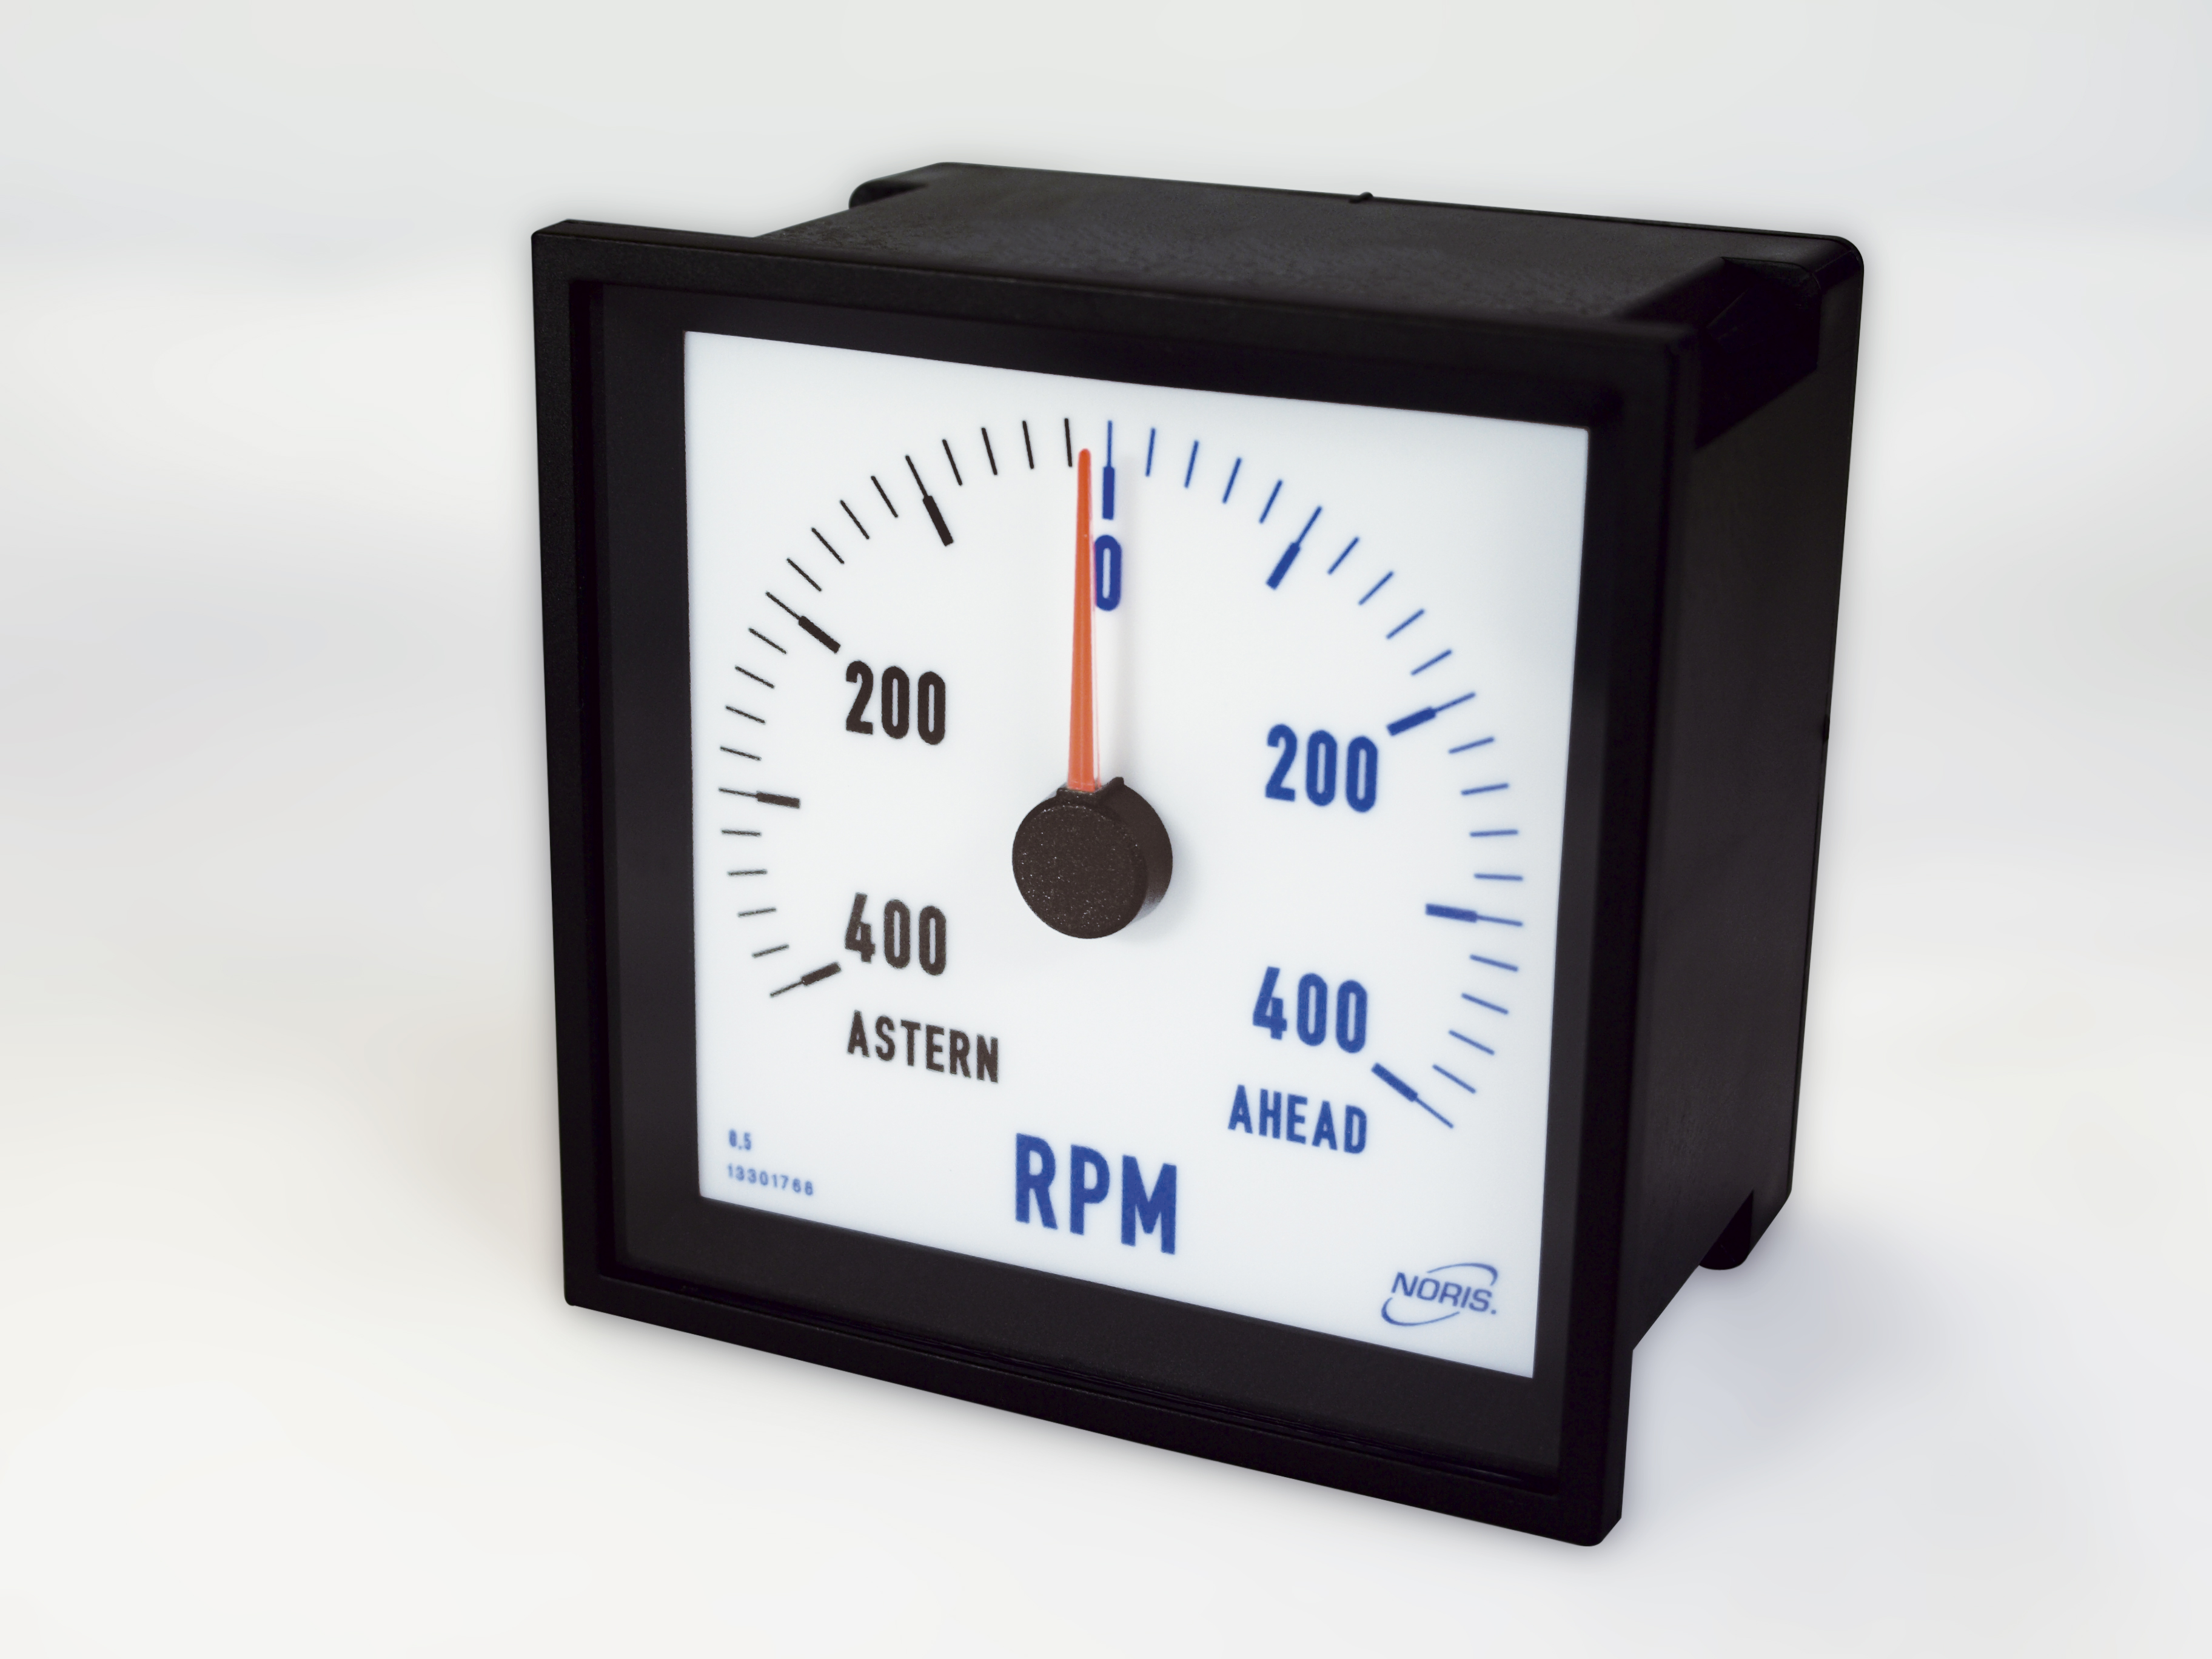 The image shows a square analogue indicator with an RPM scale on a white background.